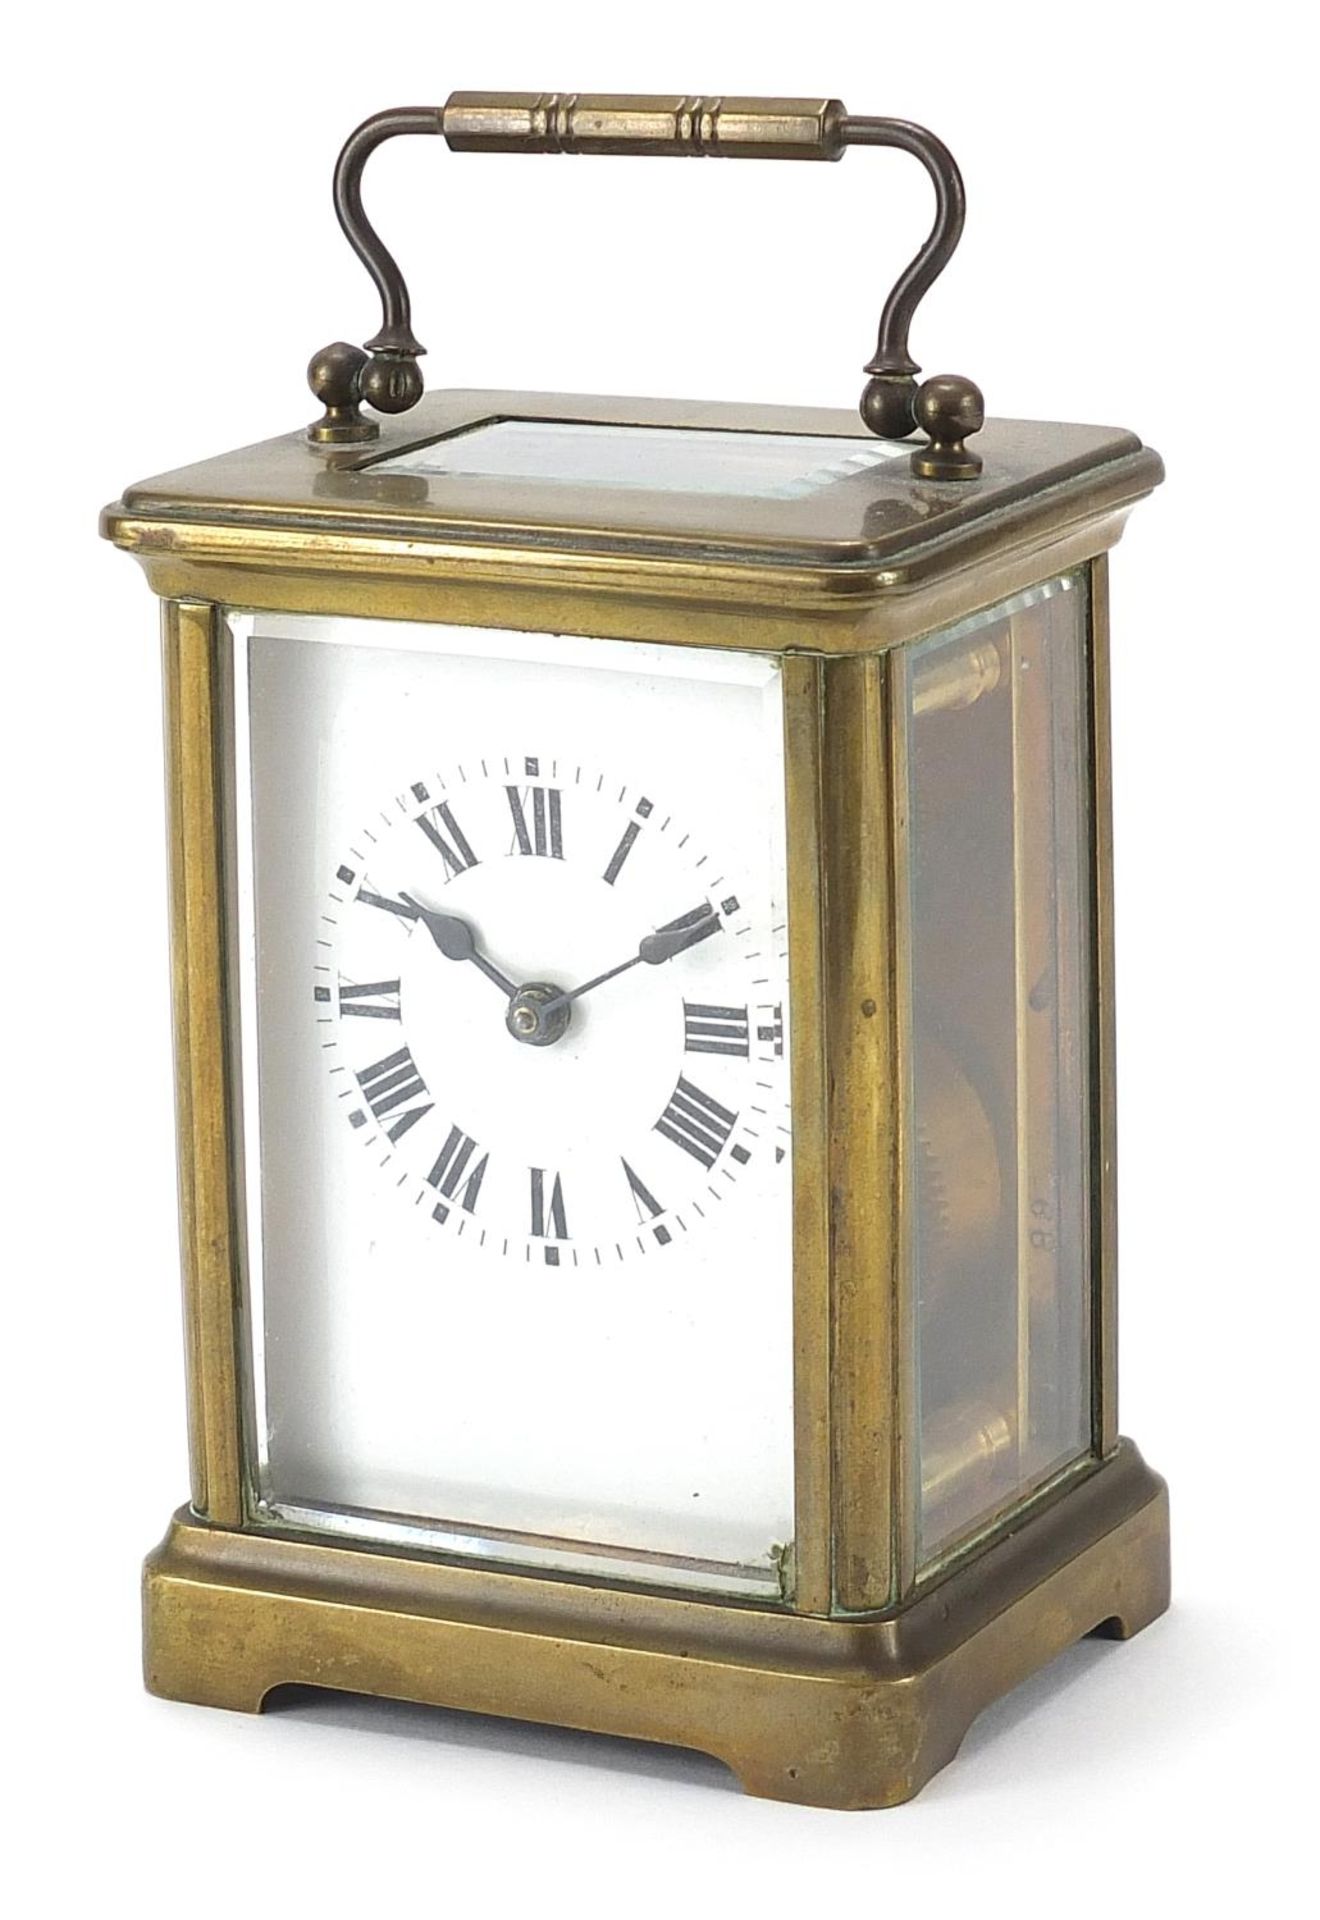 Brass cased carriage clock with swing handle, 11.5cm high